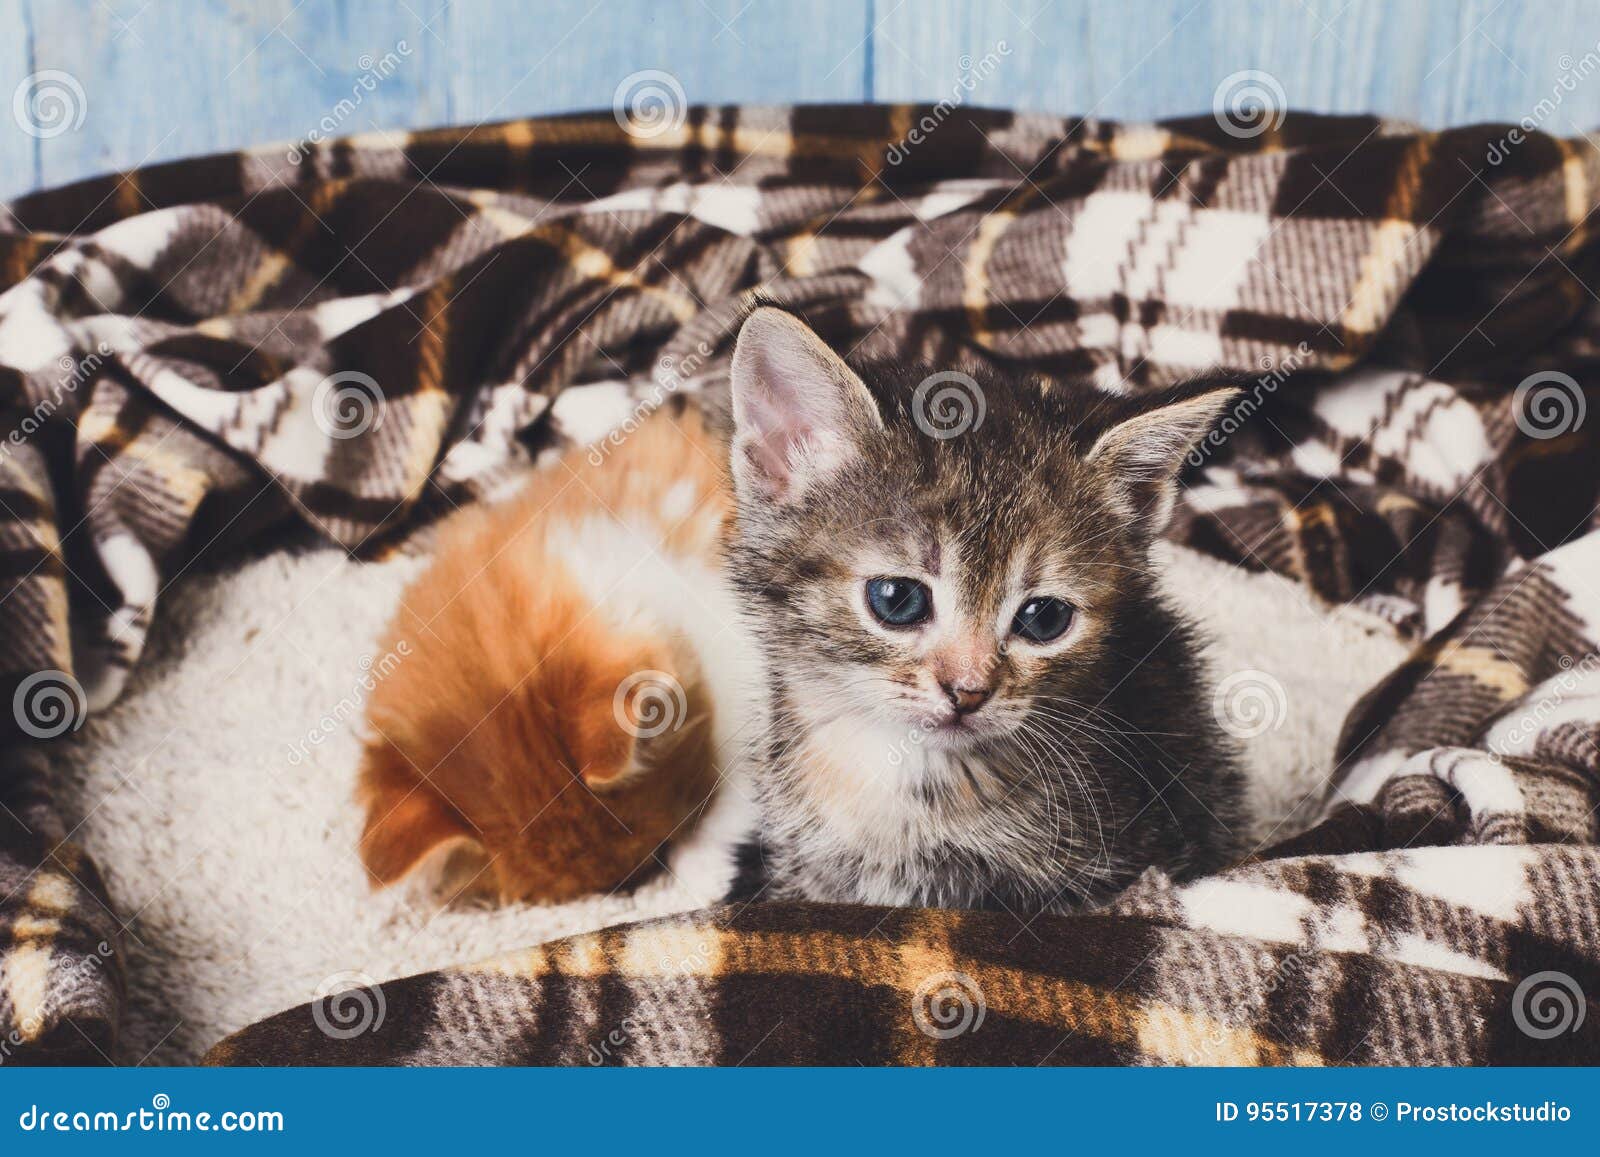 Adorable Grey Kitten at Plaid Blanket Stock Photo - Image of cute, care ...